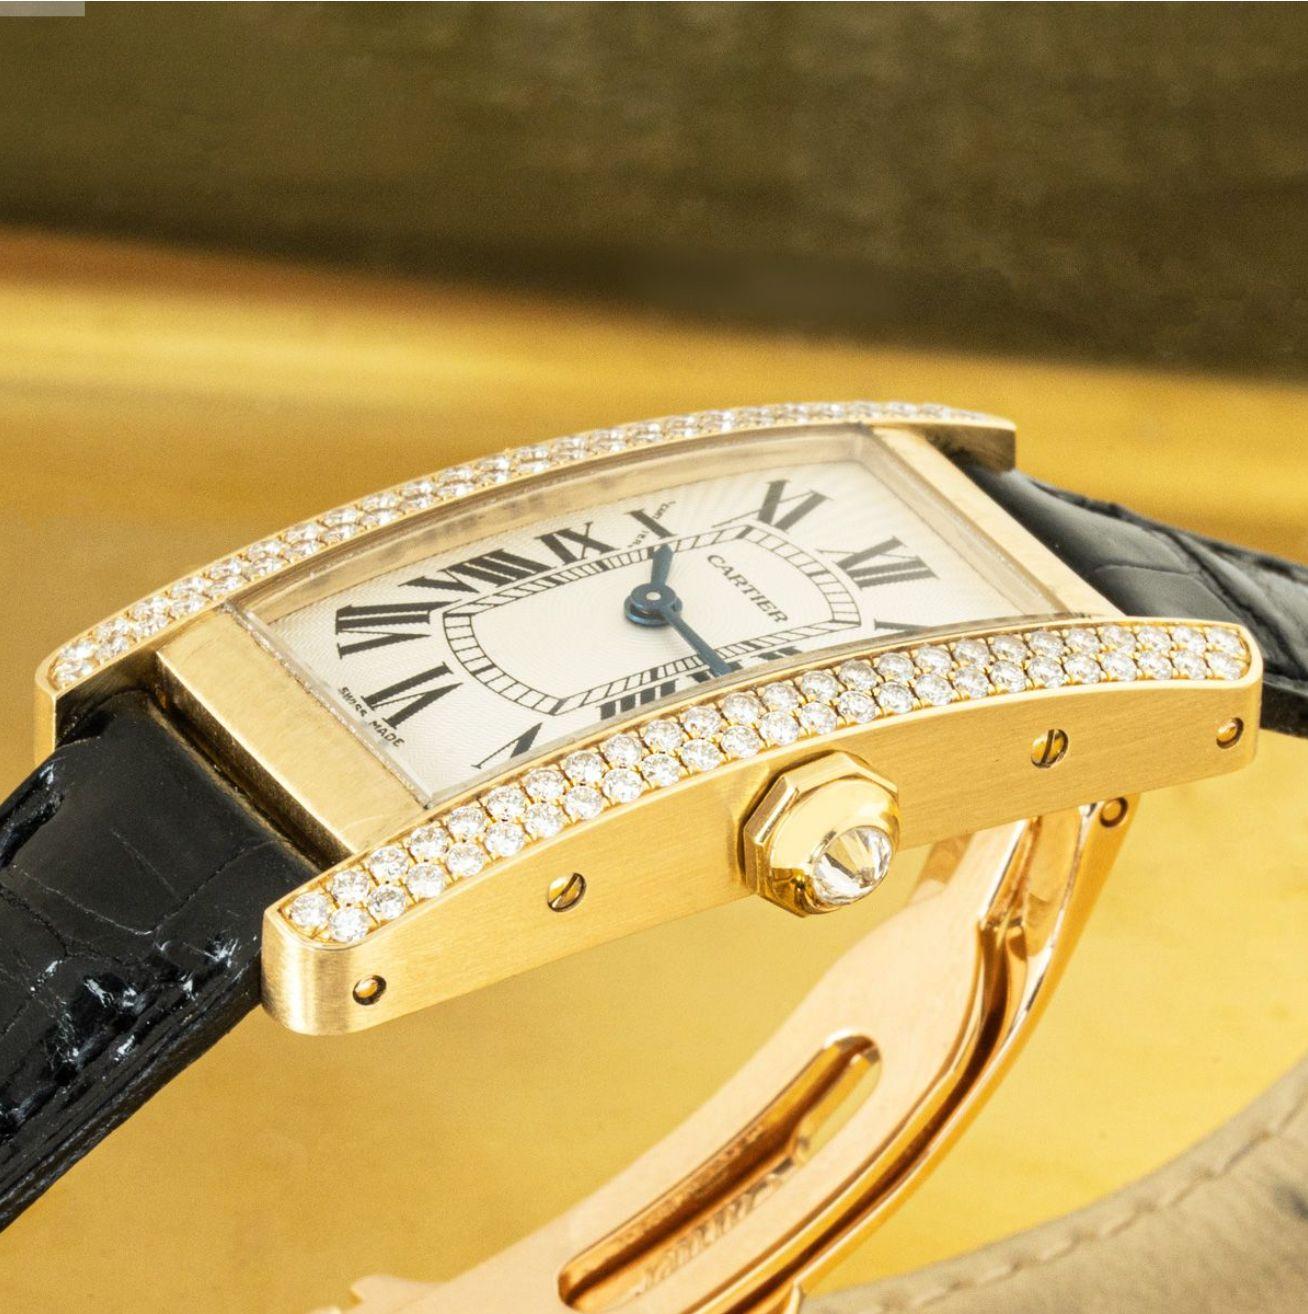 A 19mm Cartier Tank American crafted in yellow gold. Featuring a silver dial with roman numerals, blued-steel sword-shaped hands and a secret Cartier signature at 'X'. Complimenting the dial is a yellow gold bezel set with 98 round brilliant cut